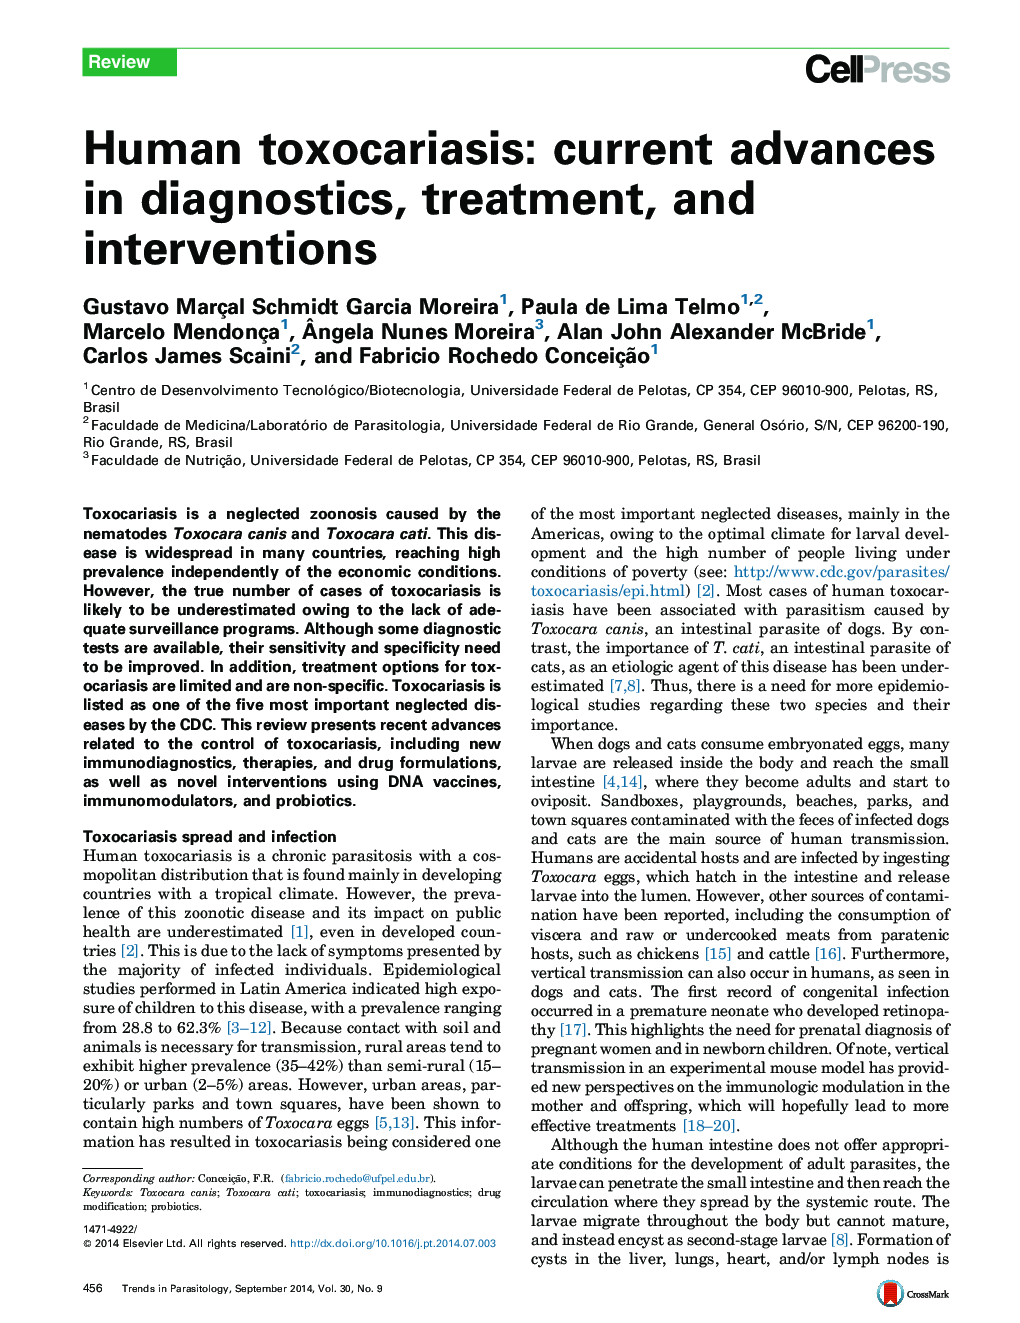 Human toxocariasis: current advances in diagnostics, treatment, and interventions